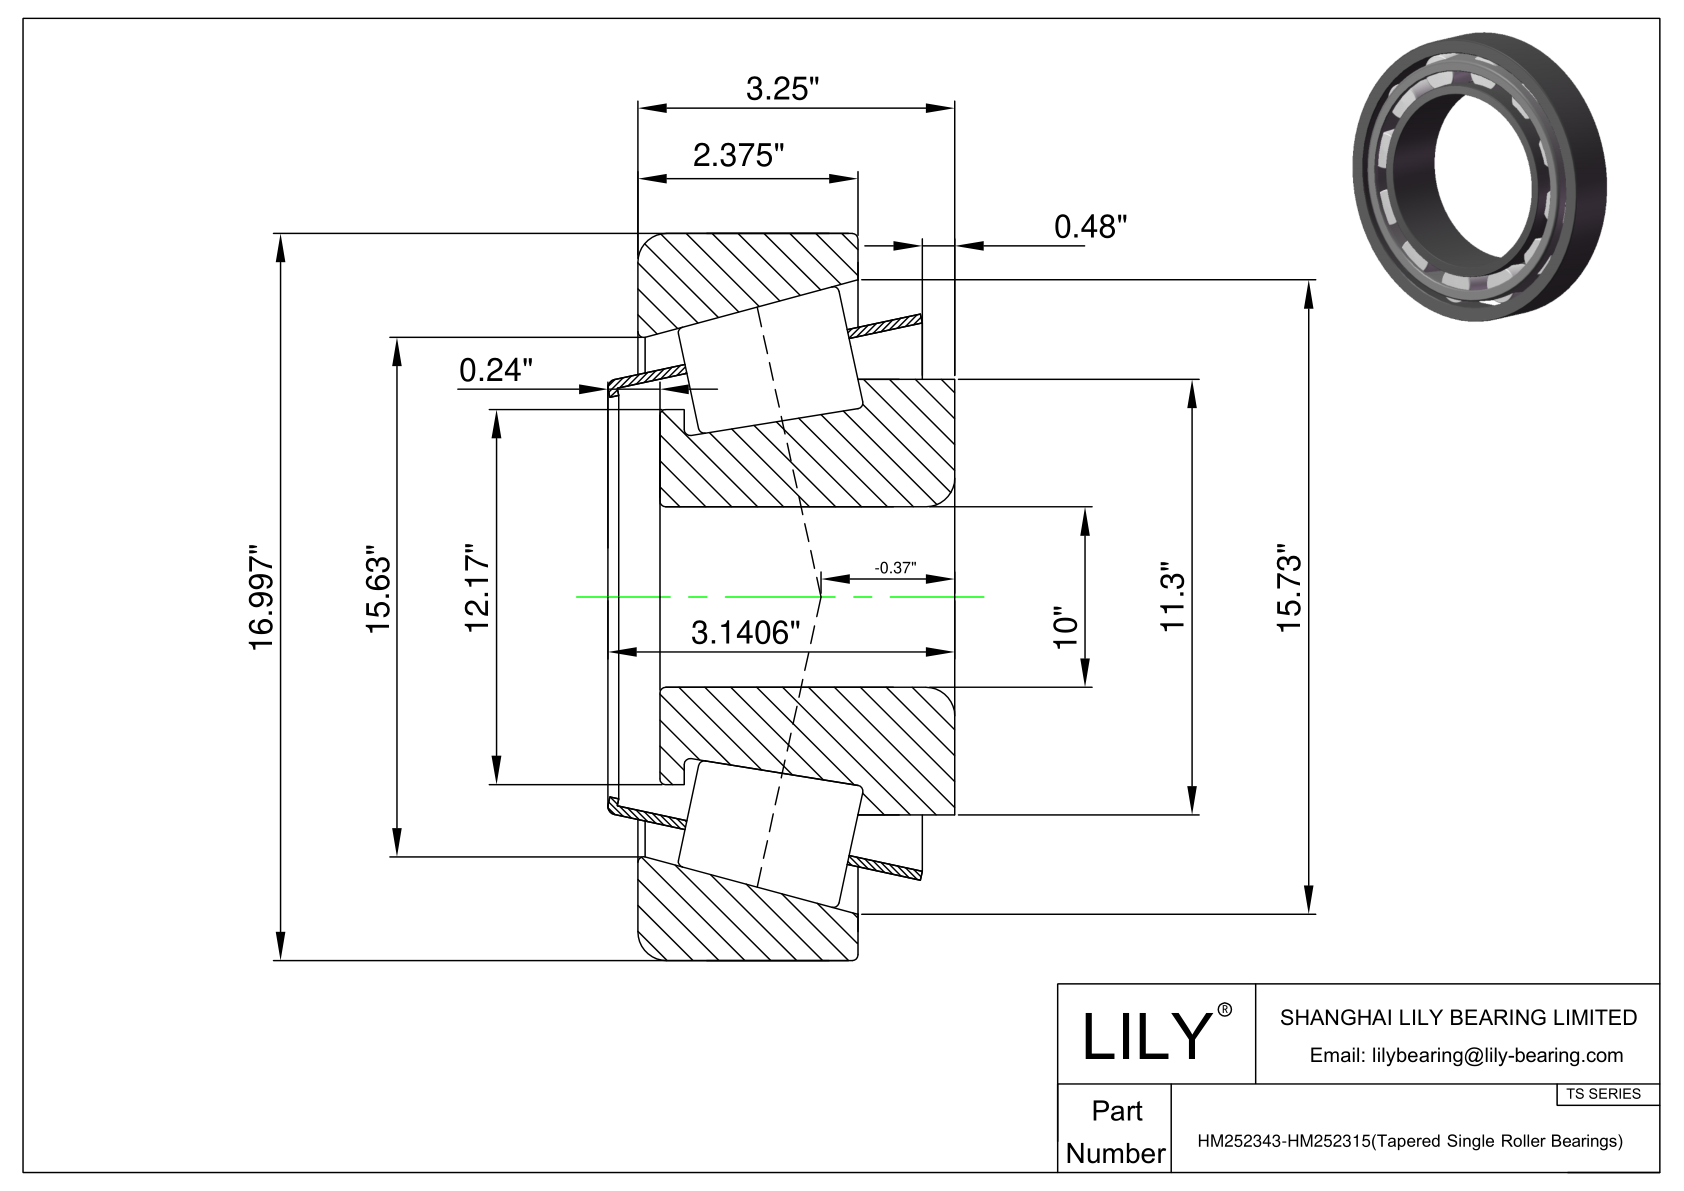 HM252343-HM252315 TS (Tapered Single Roller Bearings) (Imperial) cad drawing